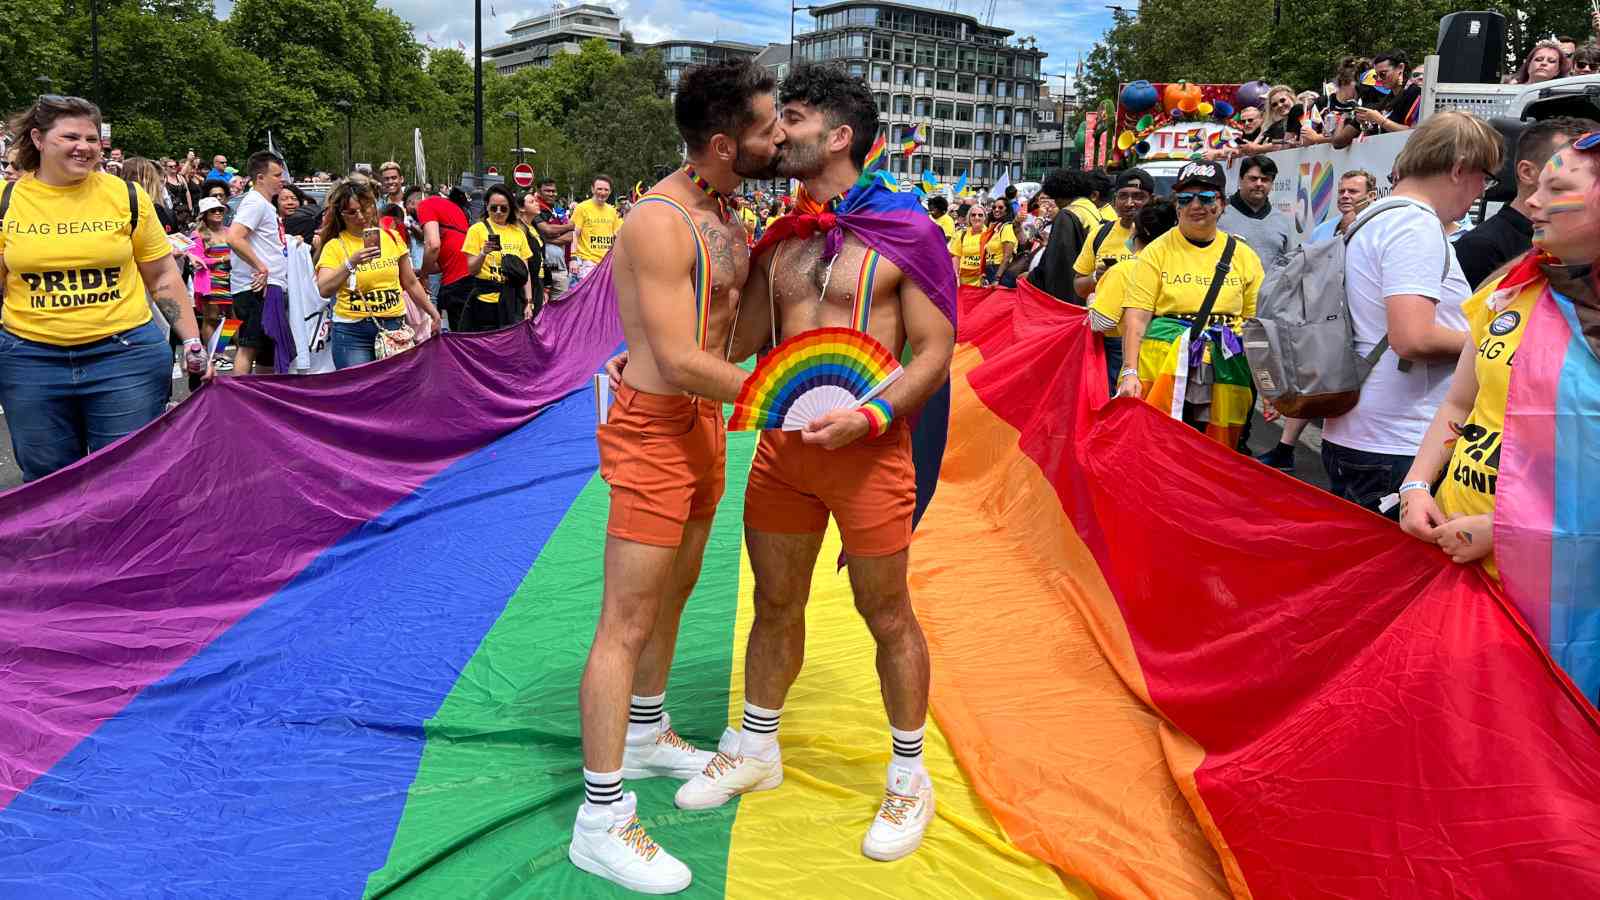 Stef and Seby kissing on a giant rainbow flag at Pride in London.